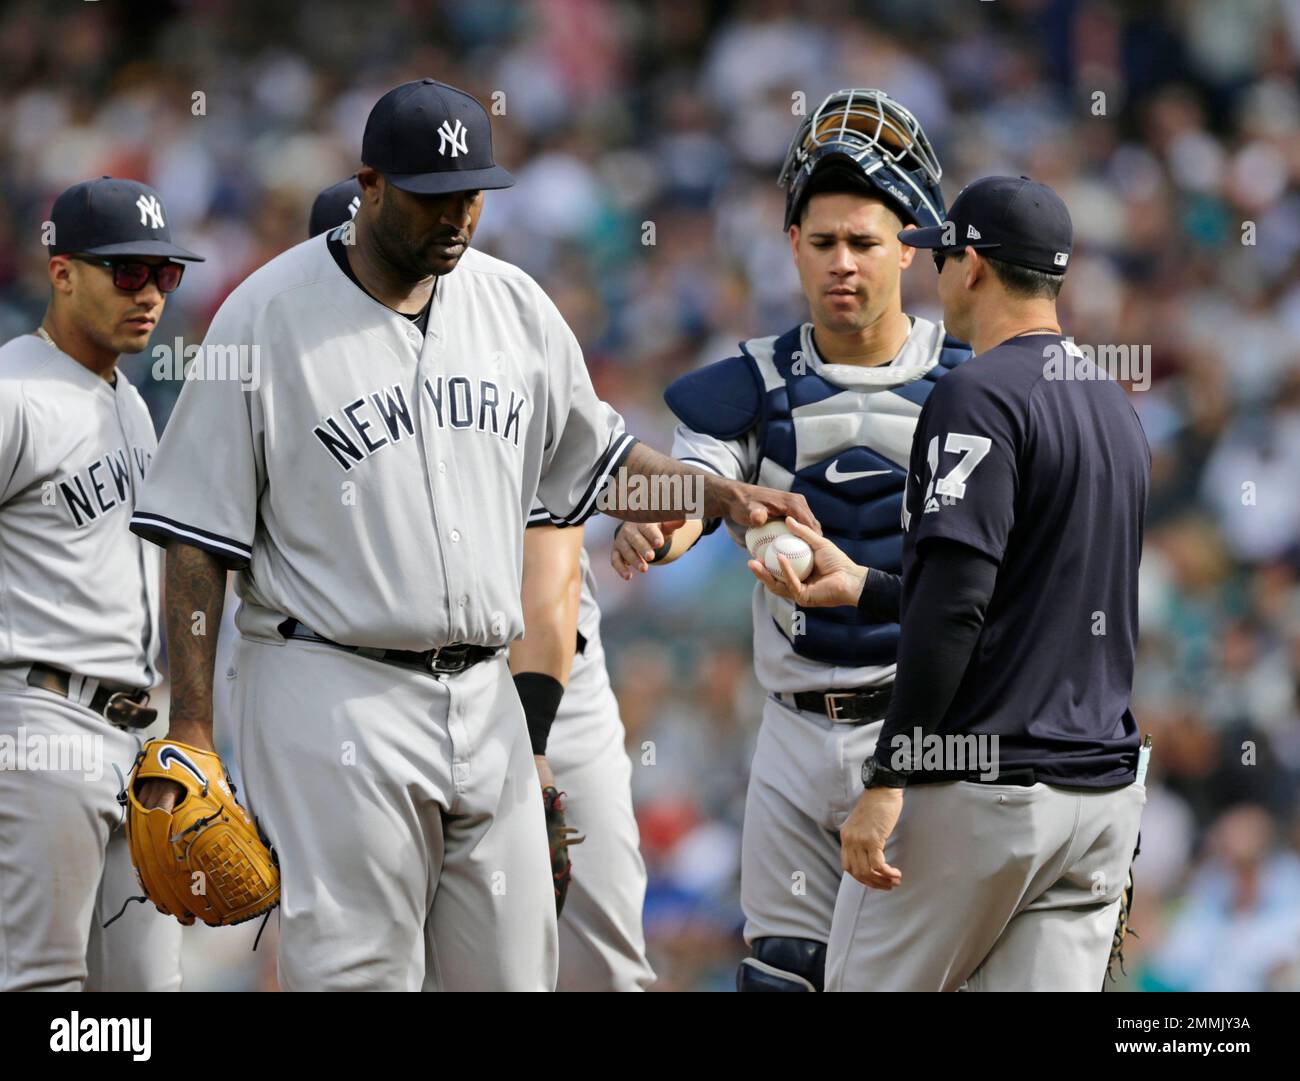 New York Yankees starting pitcher CC Sabathia hands the ball to Aaron Boone  who is already holding a baseball as he is replaced against the Seattle  Mariners during the sixth inning of